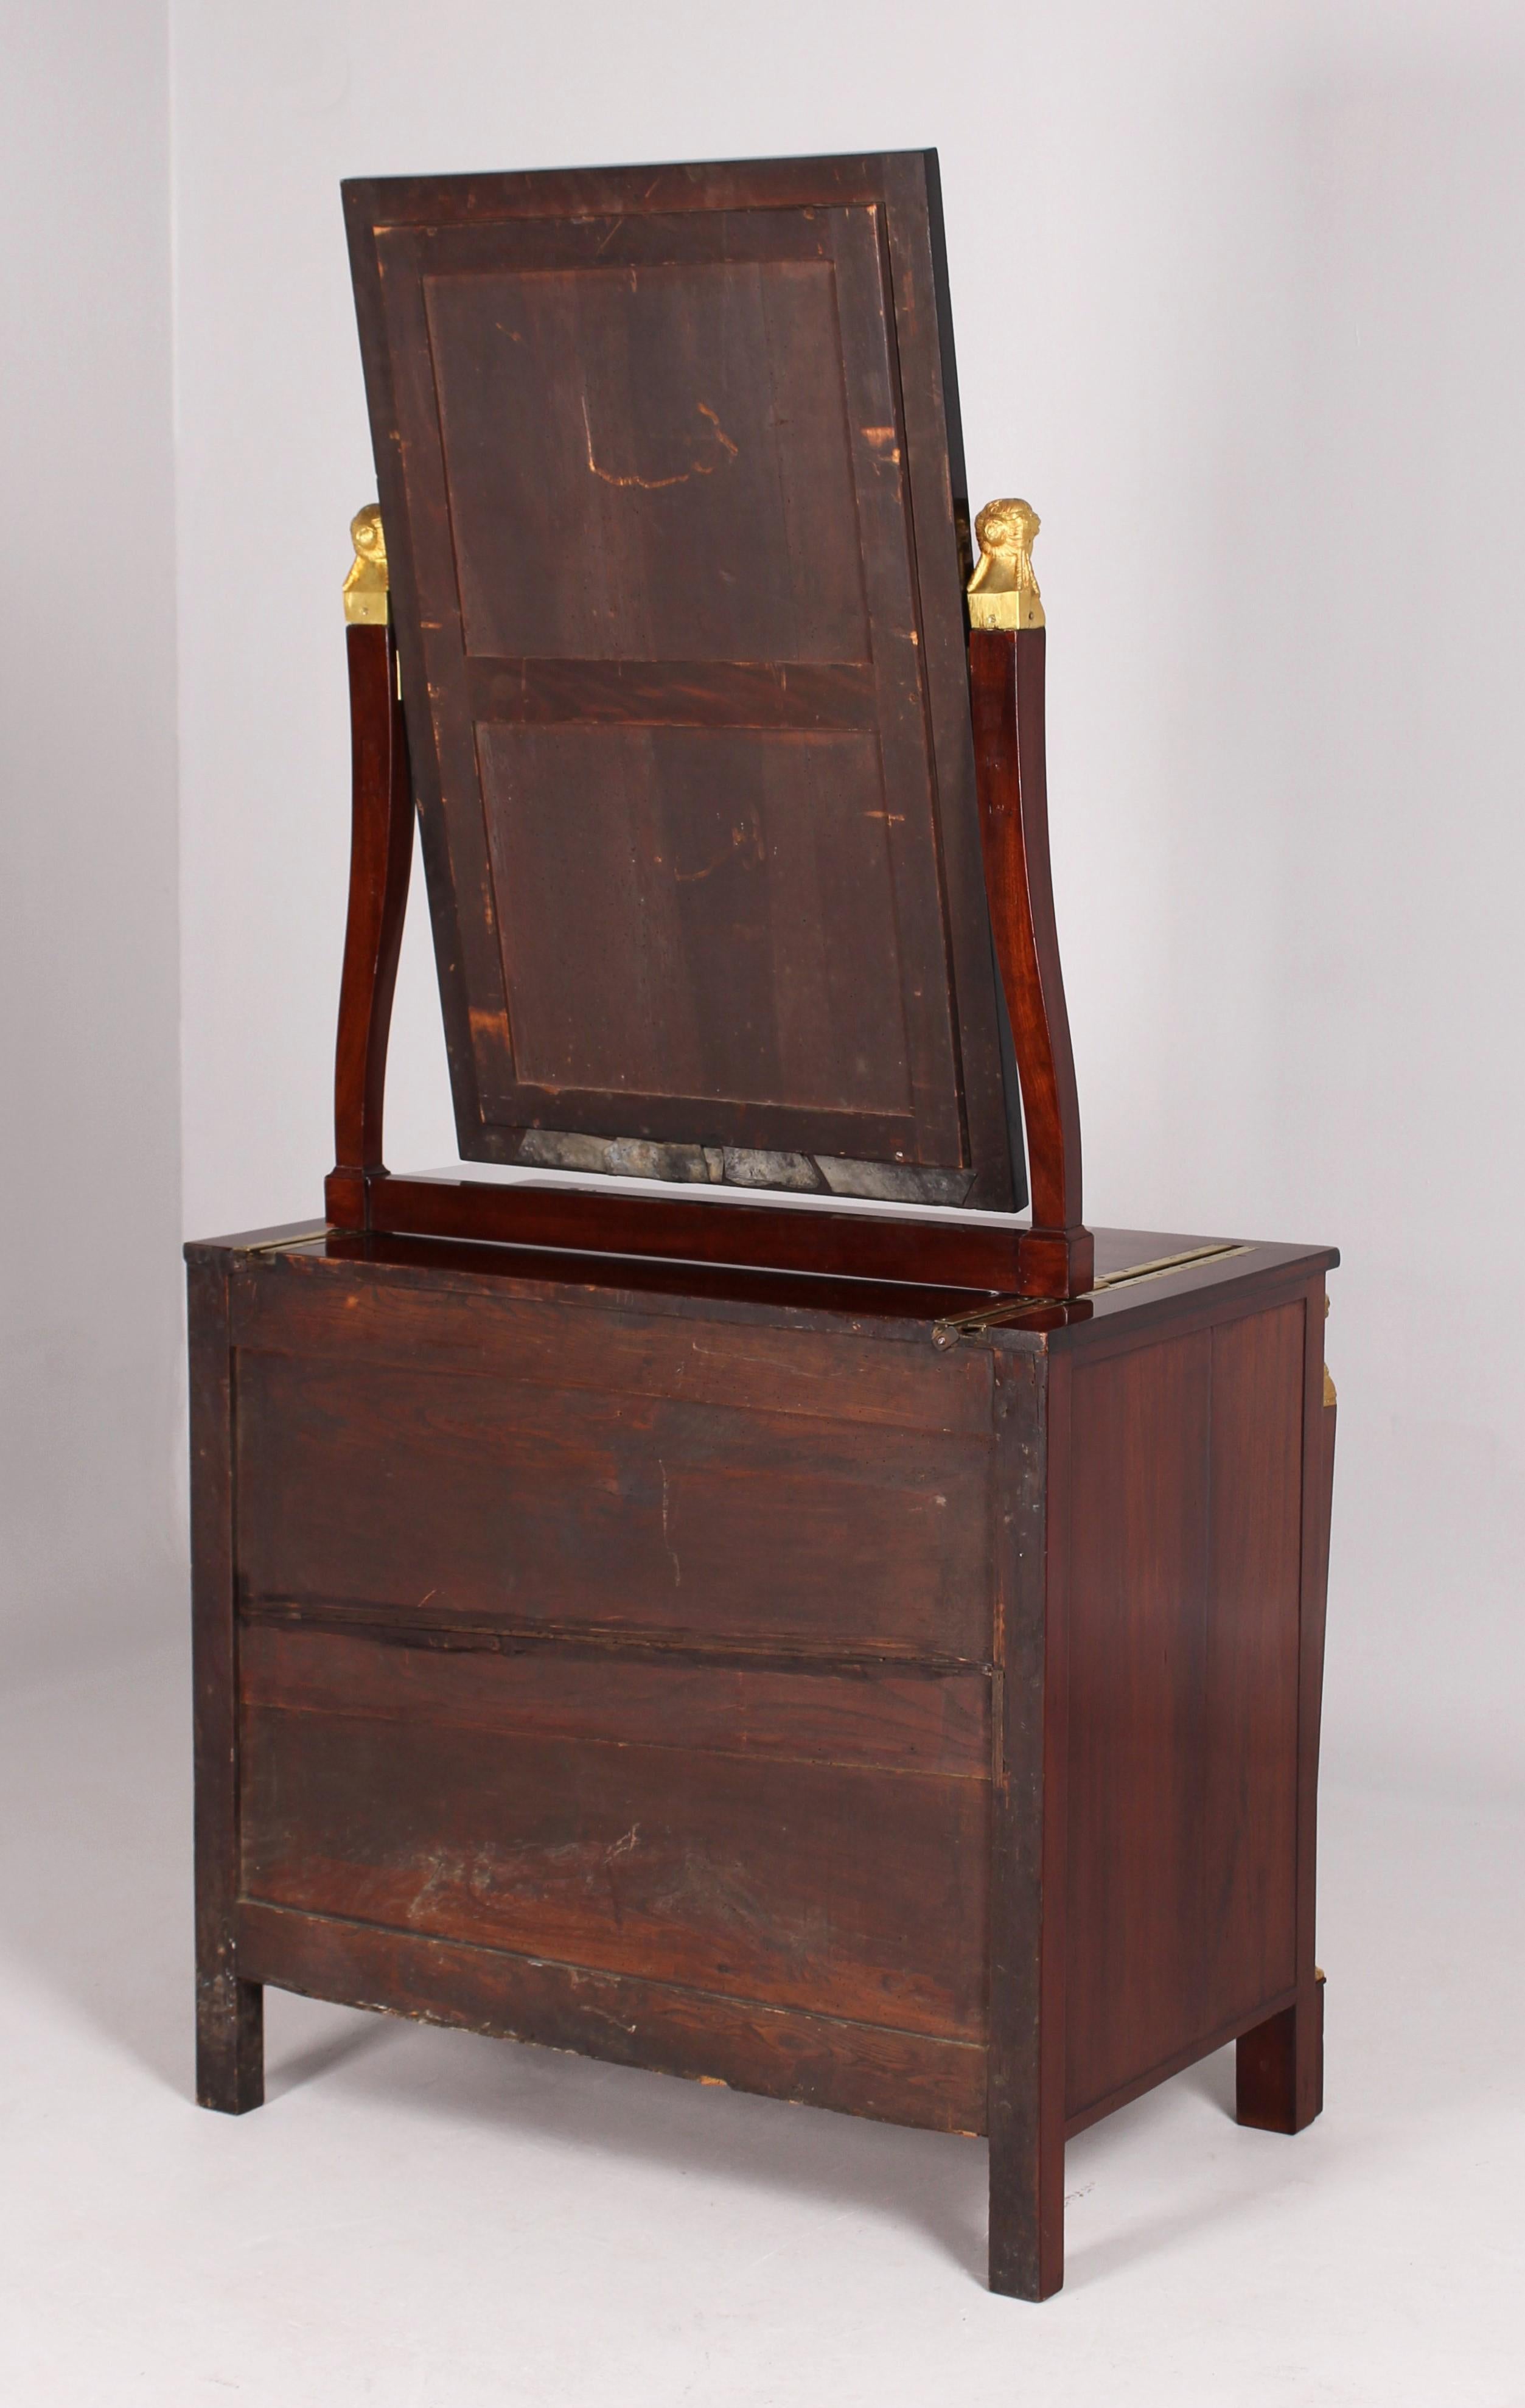 Dresser, Chest of Drawers, Mirror, stamped Jean-Joseph Chapuis, Brussels c. 1810 For Sale 12